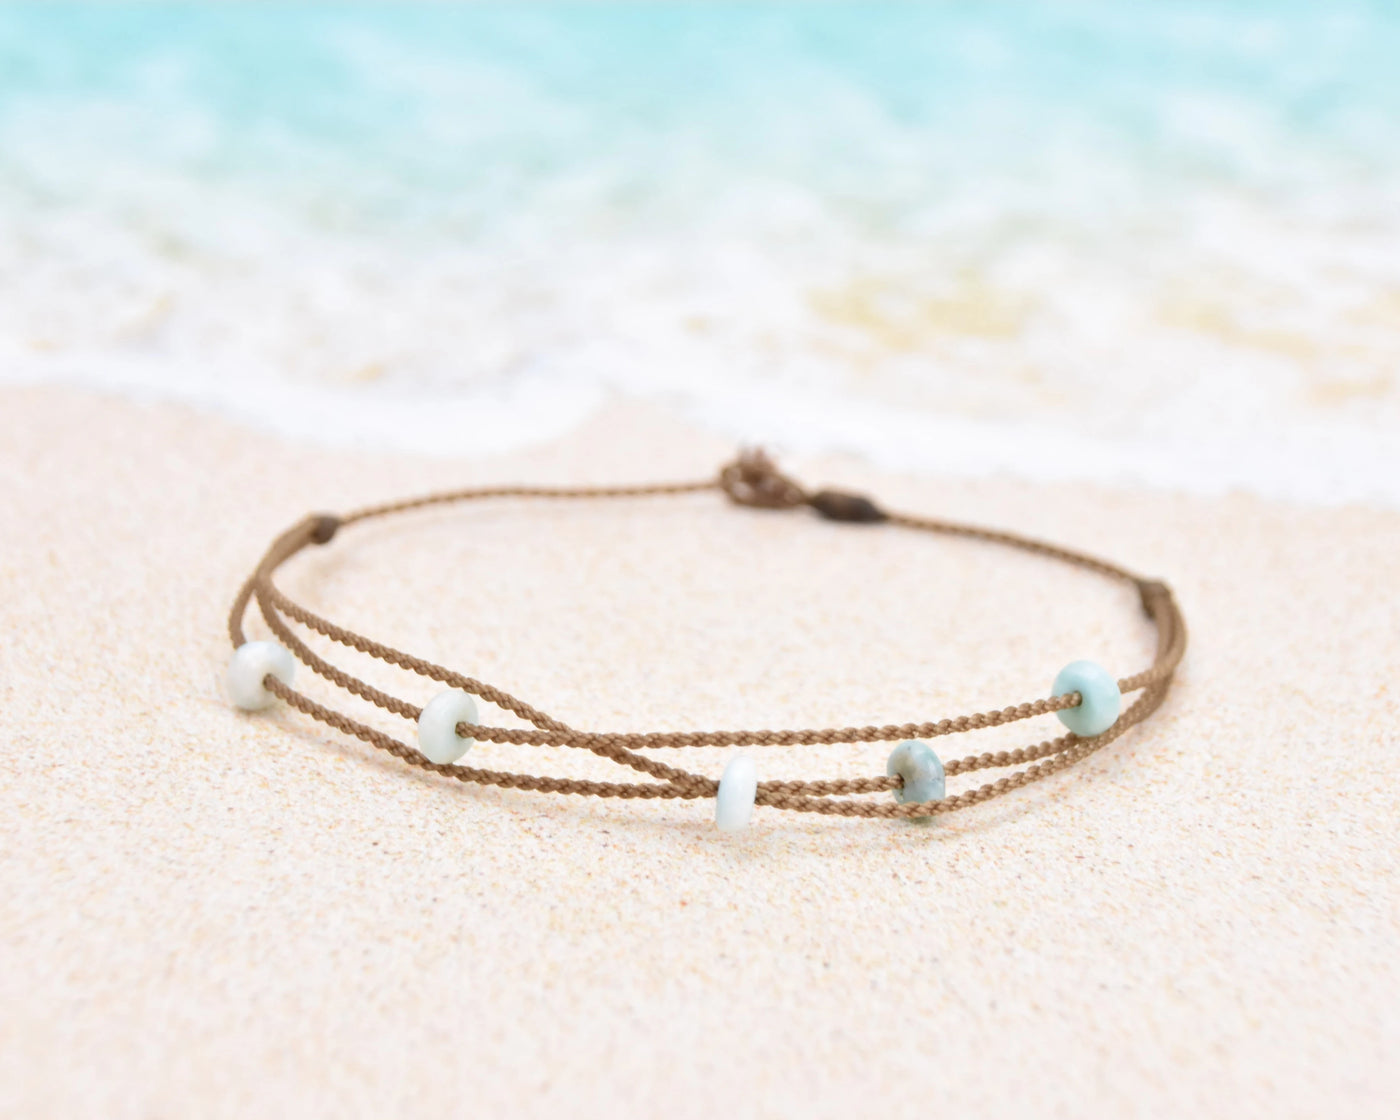 Tula Blue's waterproof Riptide anklet in larimar stones. All the drama of a stack in one perfect anklet.